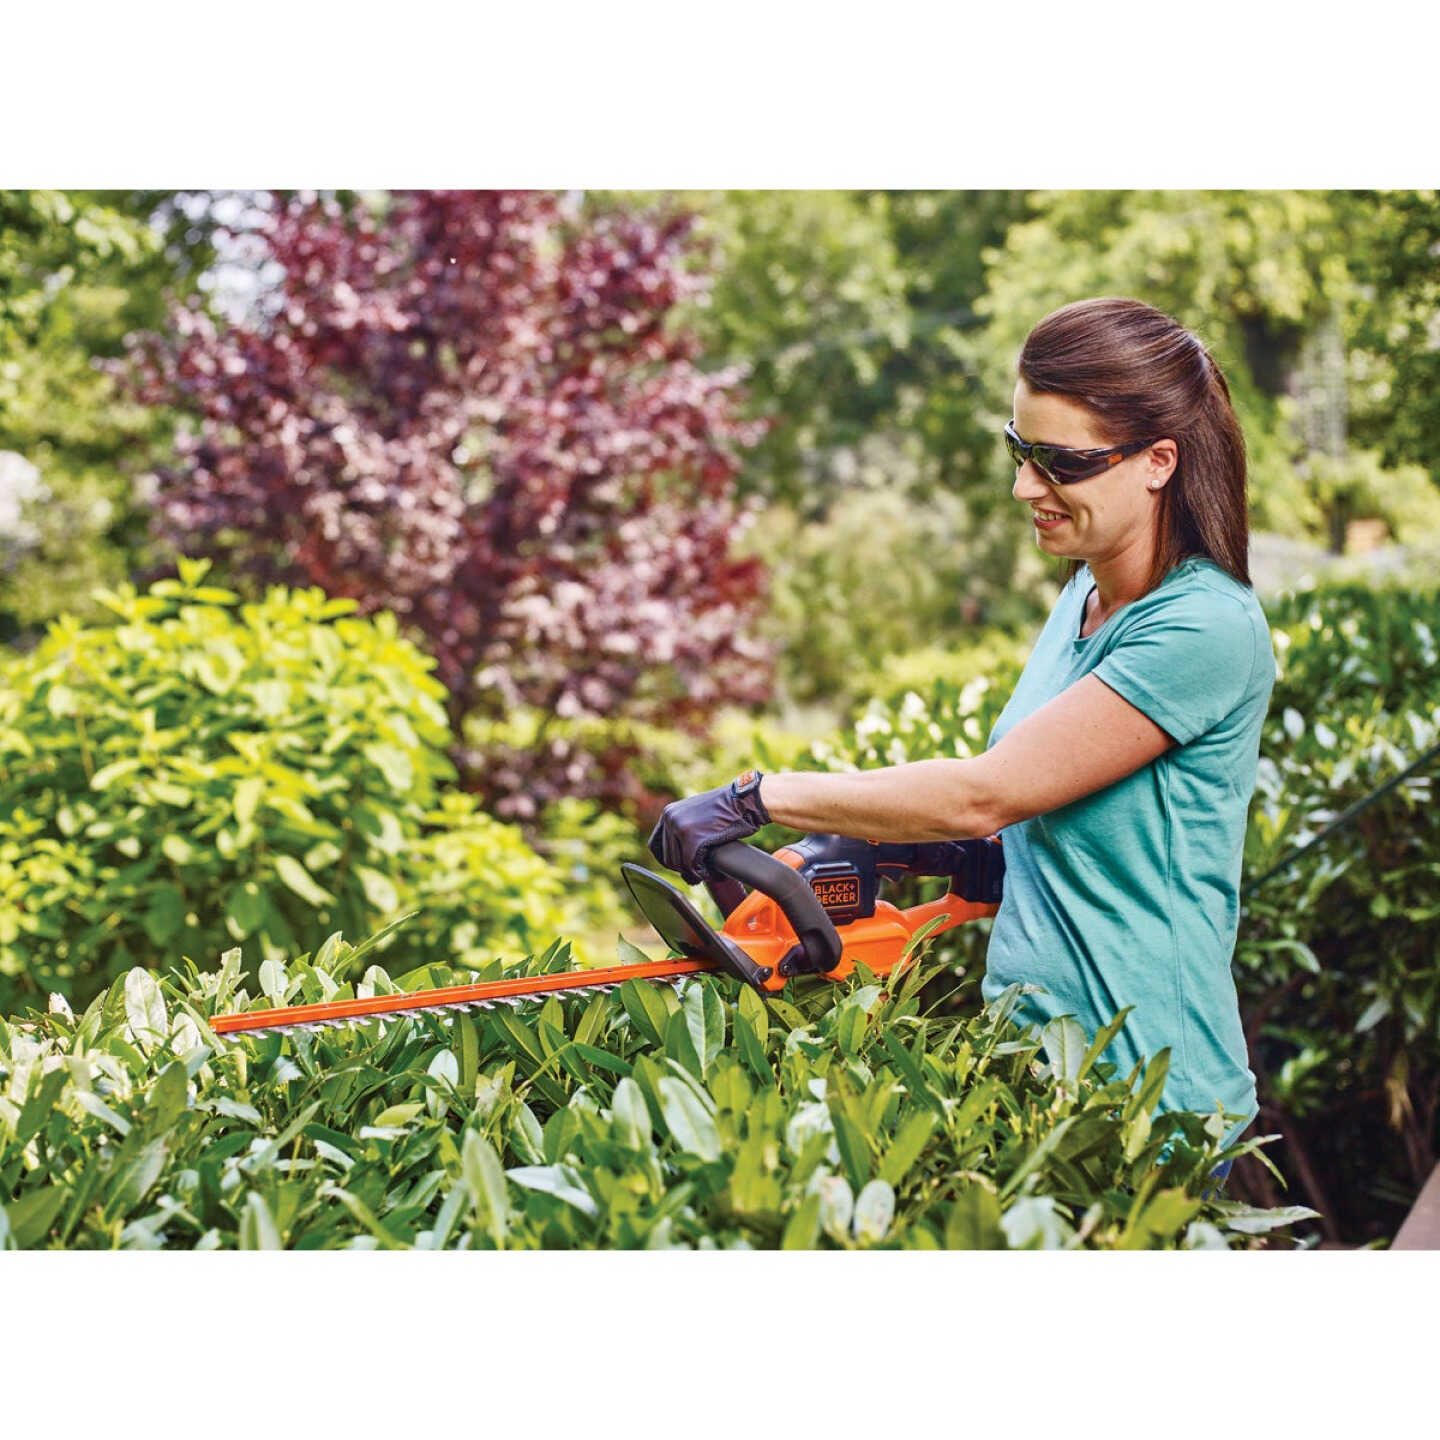 Brand New BLACK+DECKER 20V MAX Cordless Hedge Trimmer with Power